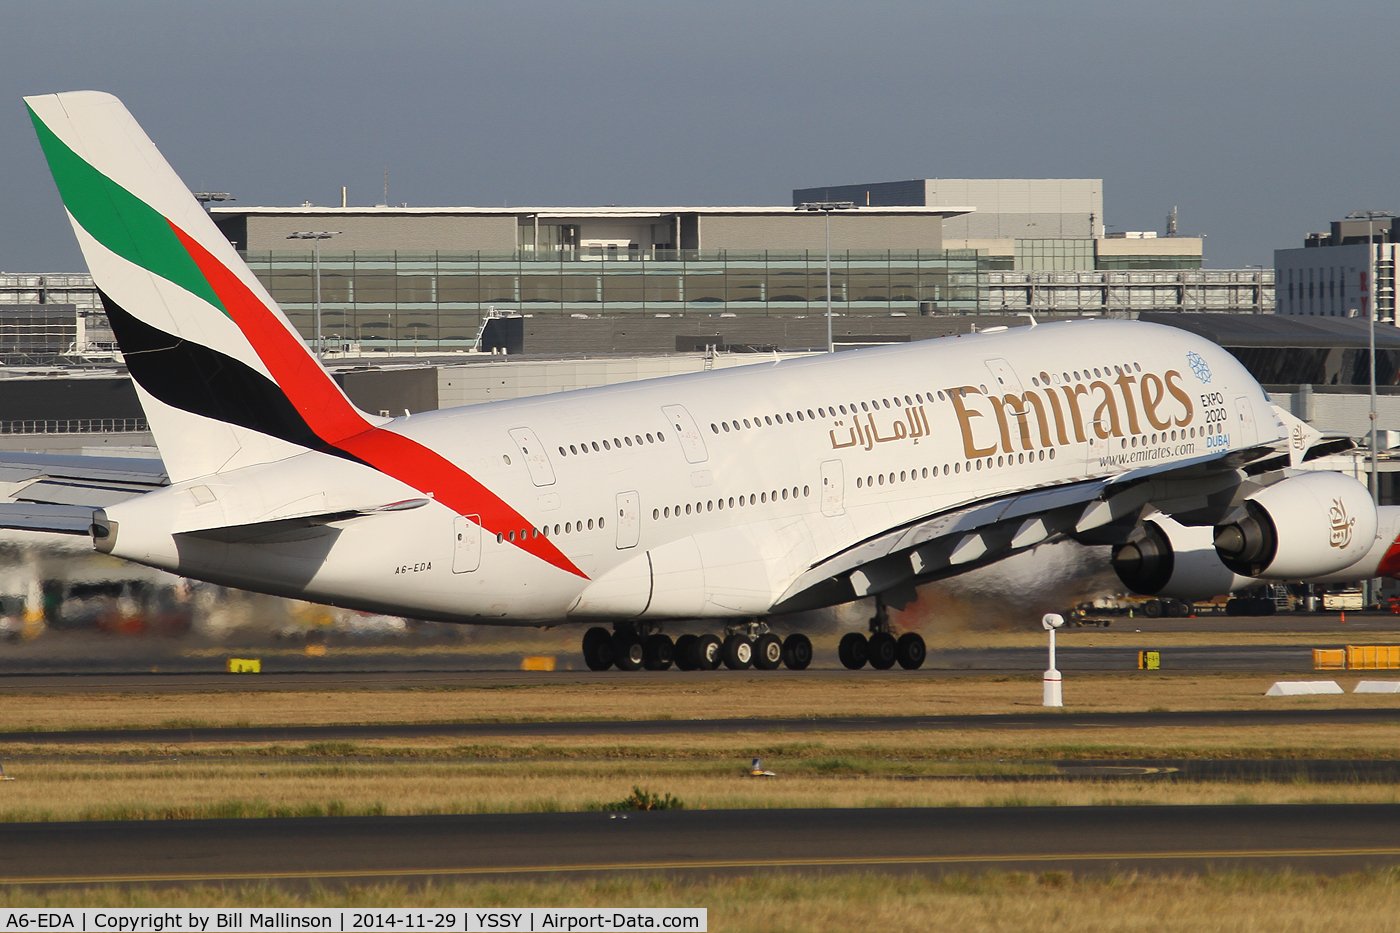 A6-EDA, 2007 Airbus A380-861 C/N 011, rotating from 34L